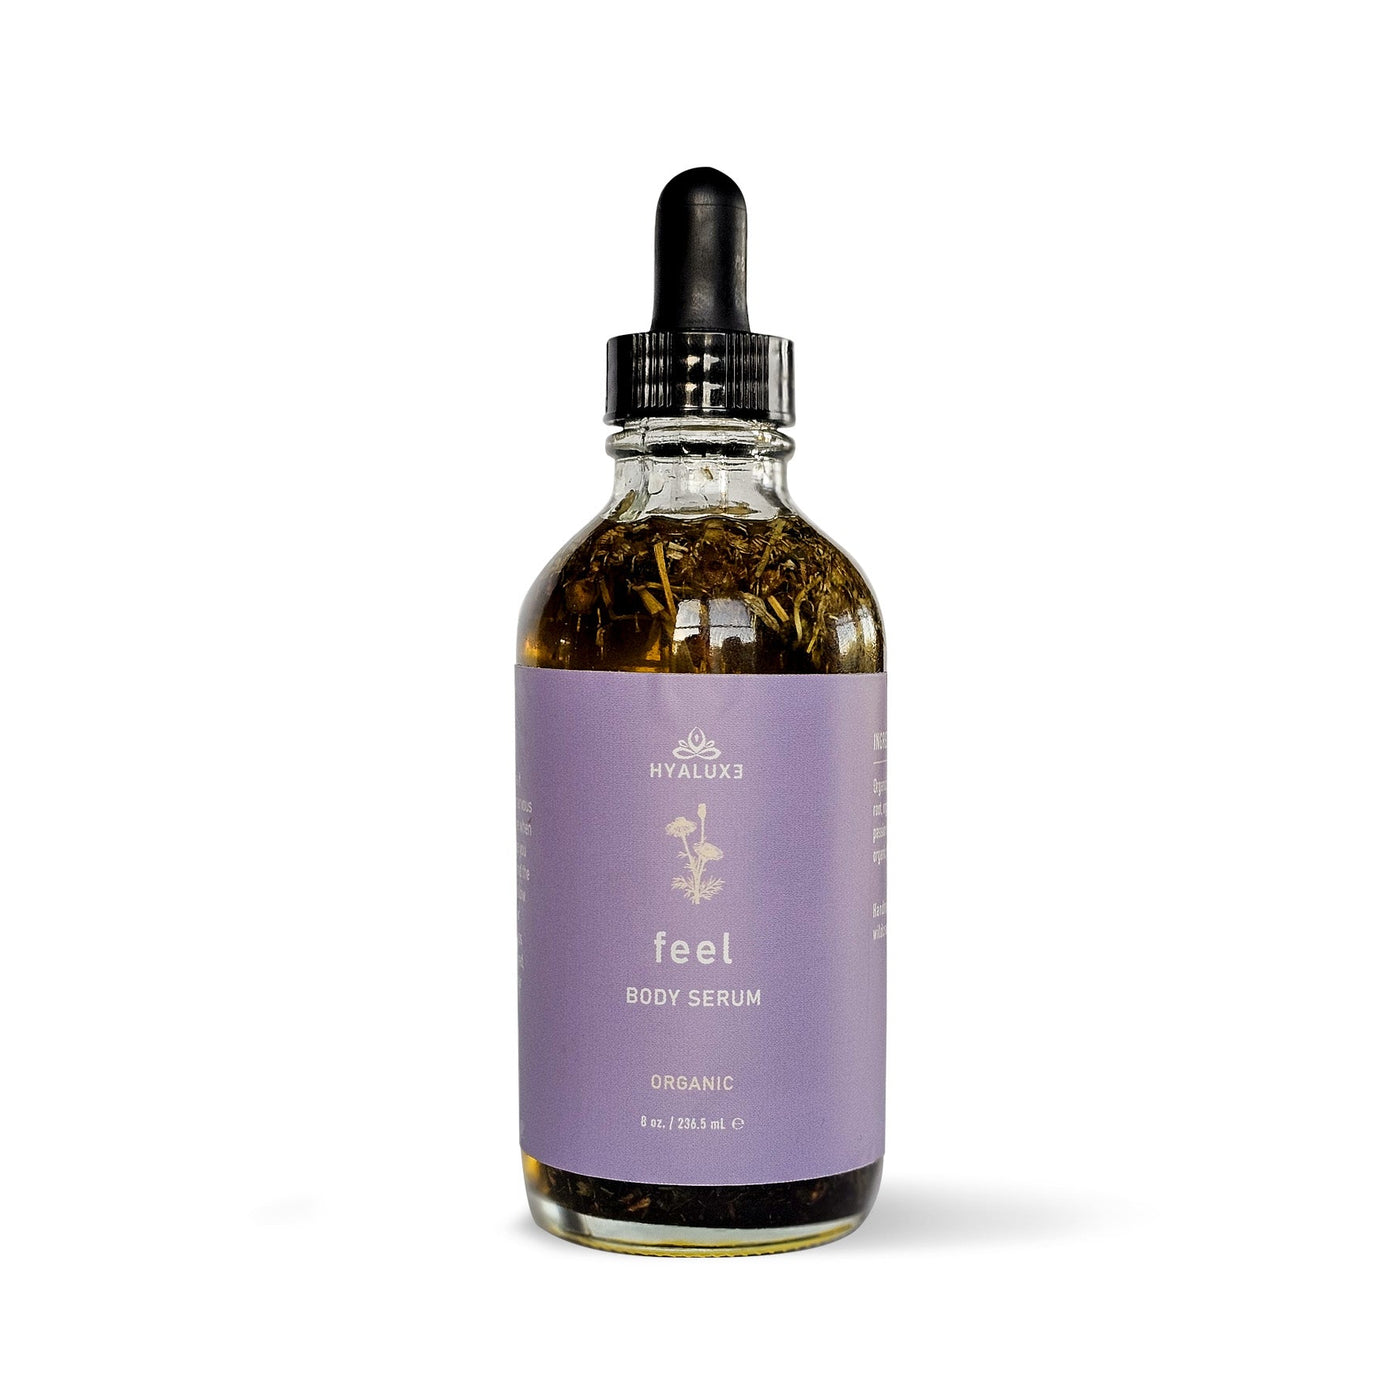 FEEL: Soothing Mind and Inflammation Body Serum - Hyaluxe Body